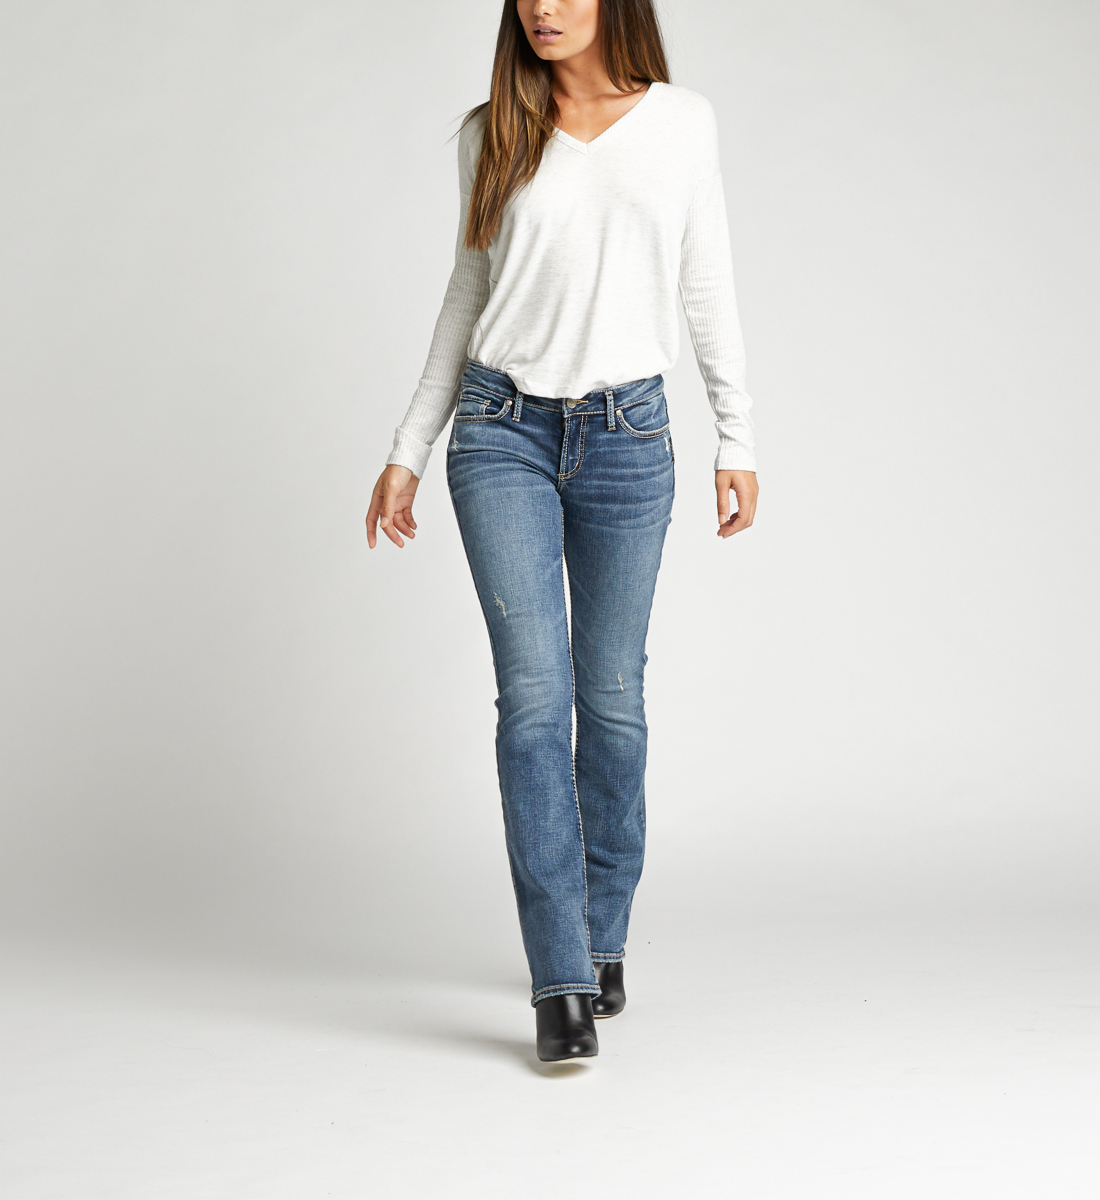 Silver Jeans Elyse Mid Rise Slim Bootcut Jeans